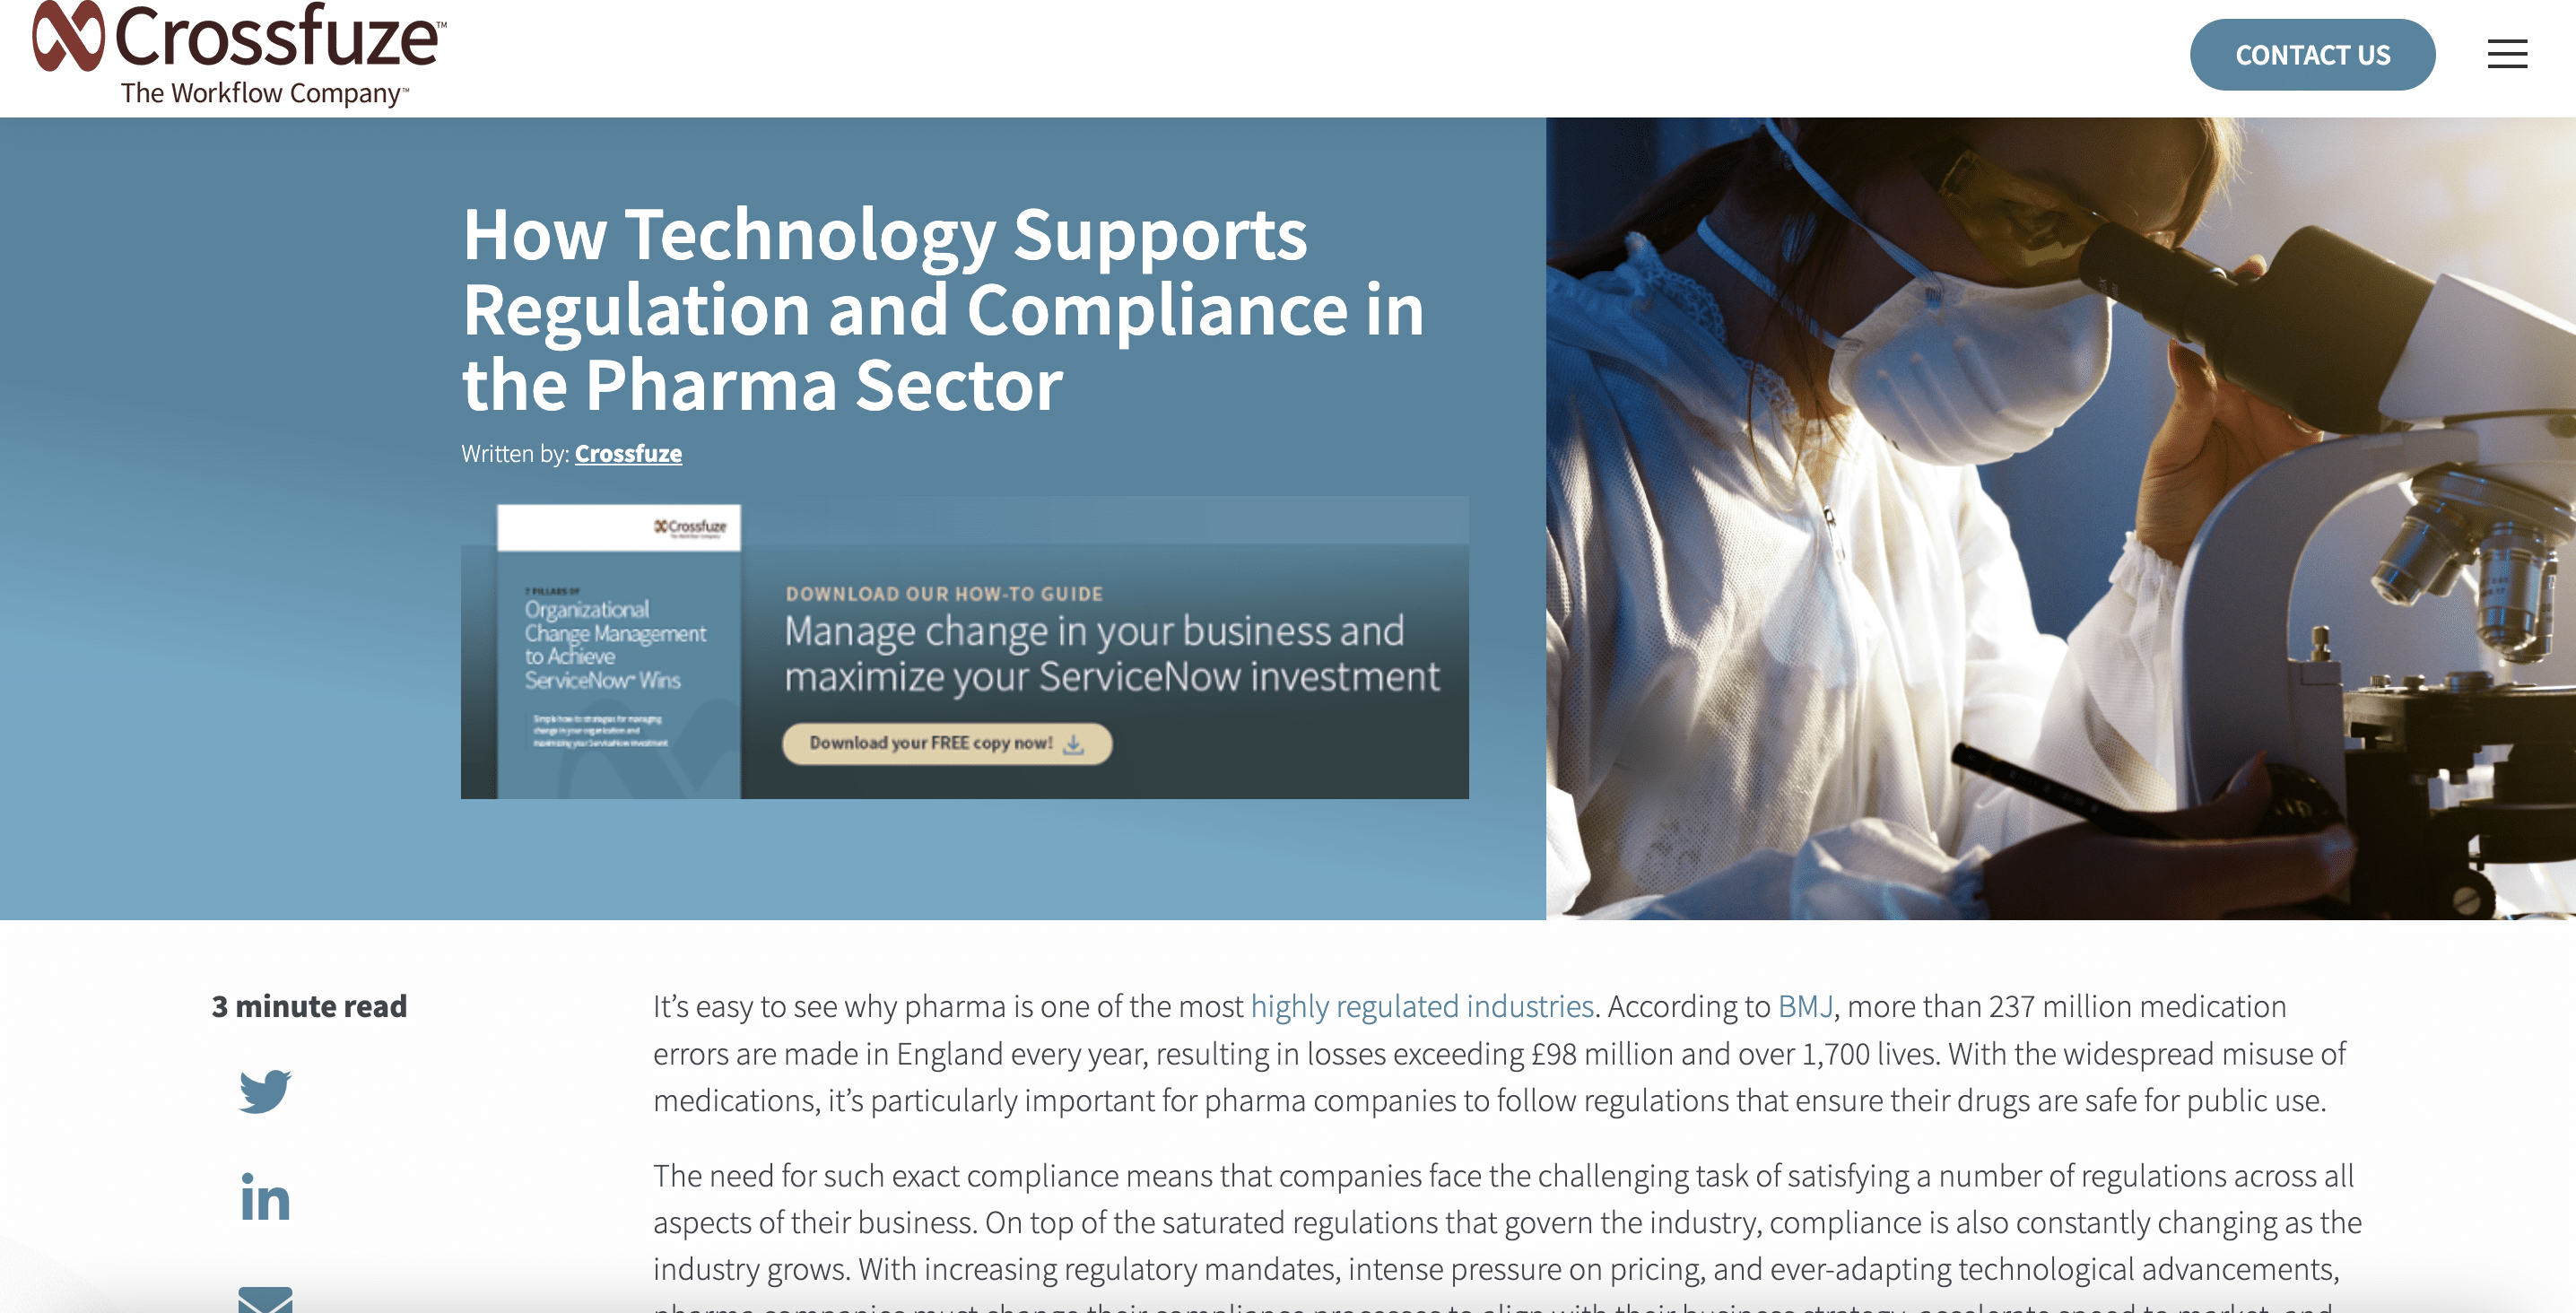 How Technology Supports Regulation and Compliance in the Pharma Sector